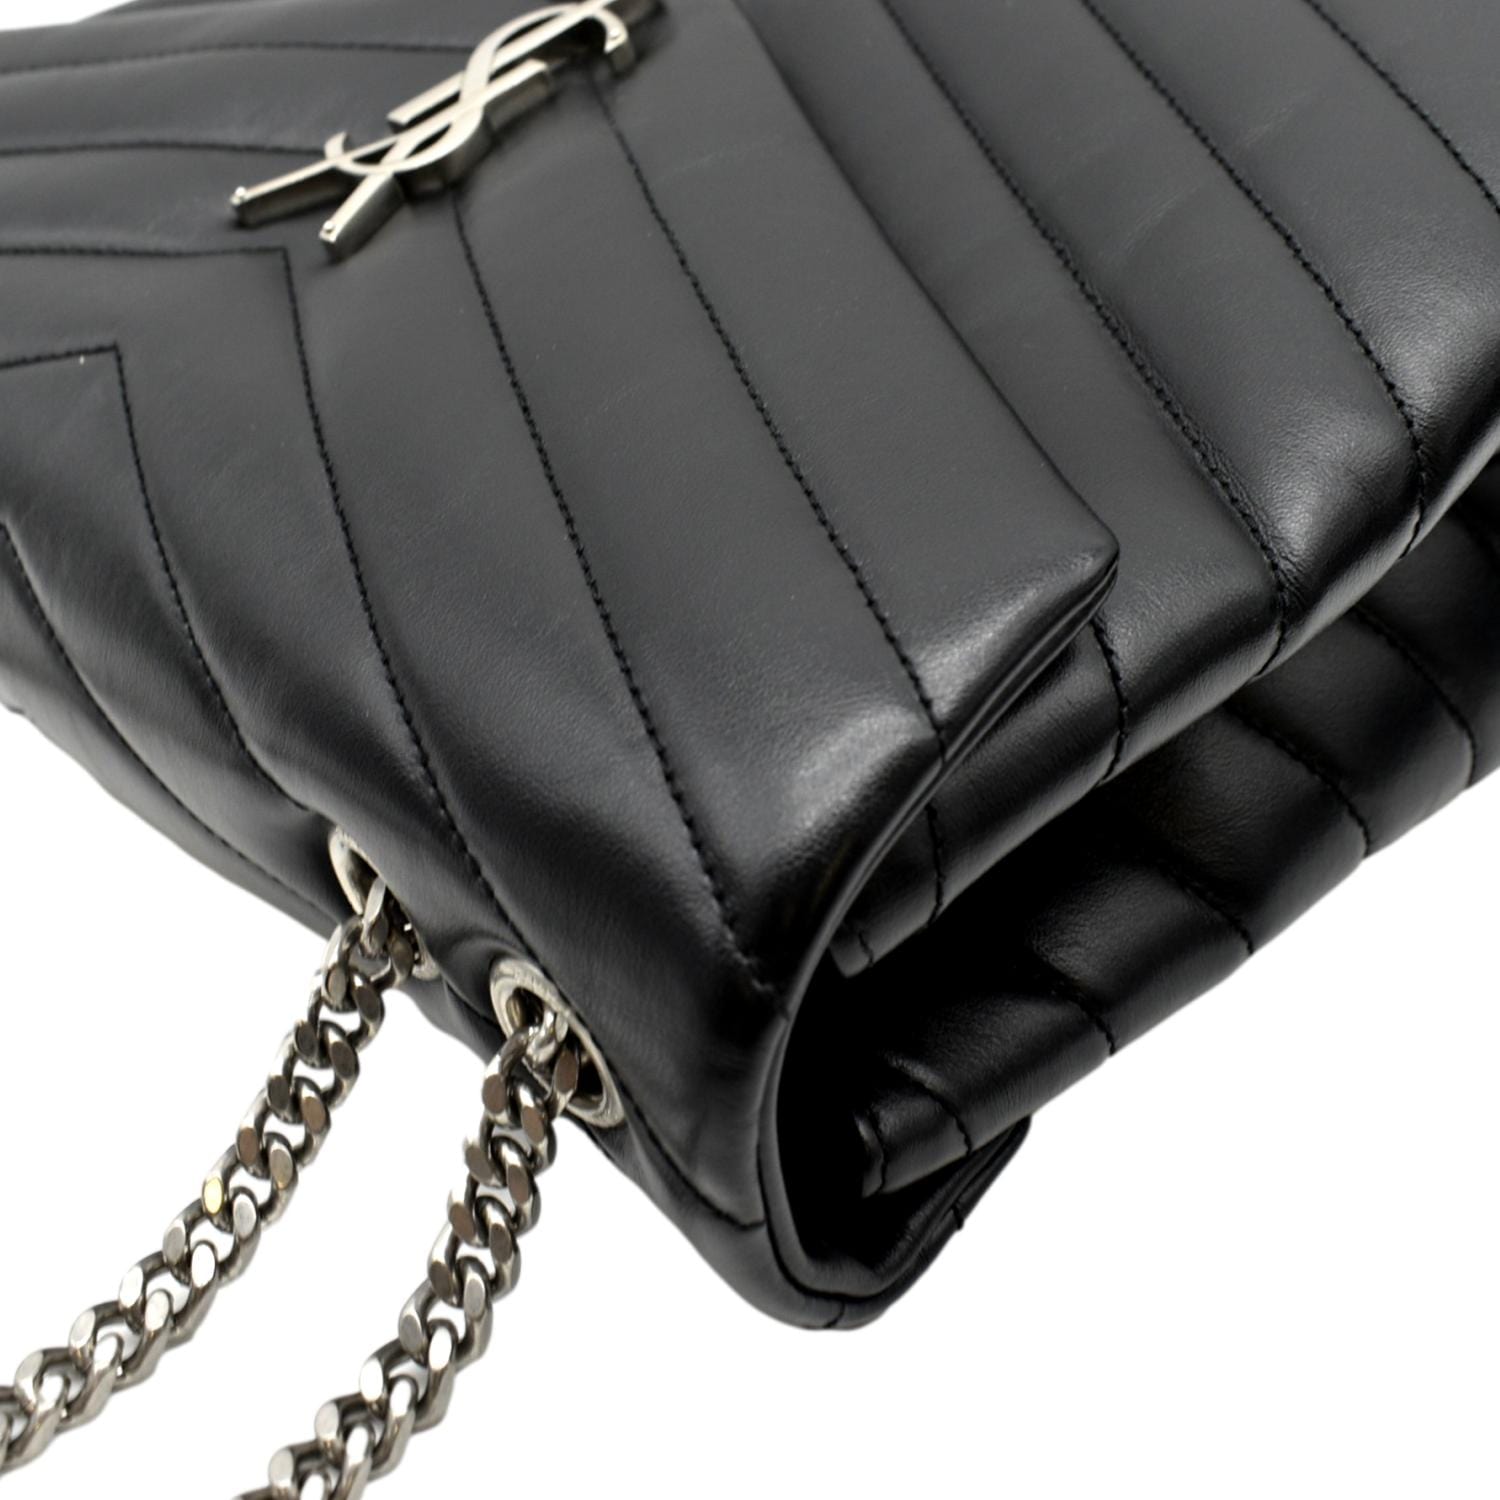 YSL Saint Laurent Small Loulou Chain Leather Shoulder Bag Black and Silver